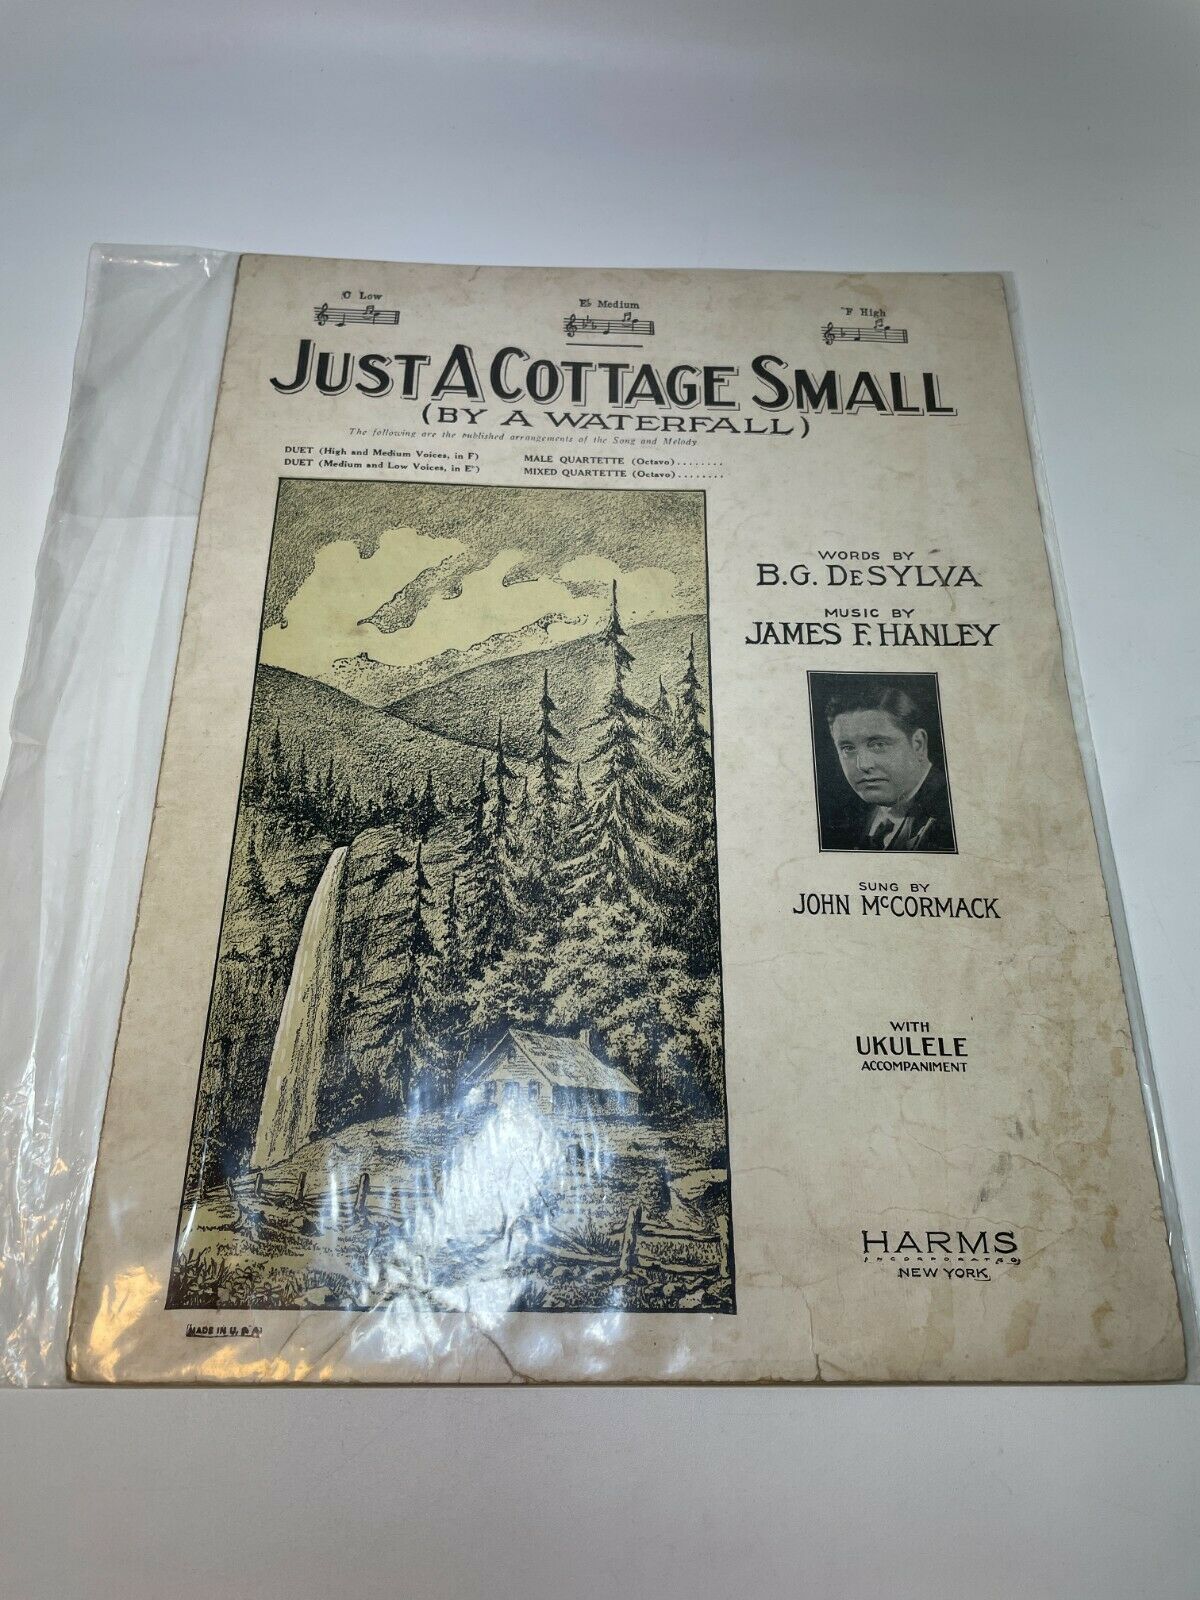 Just a Cottage Small (By a Waterfall) (1925), Adeali (1921) Sheet Music +